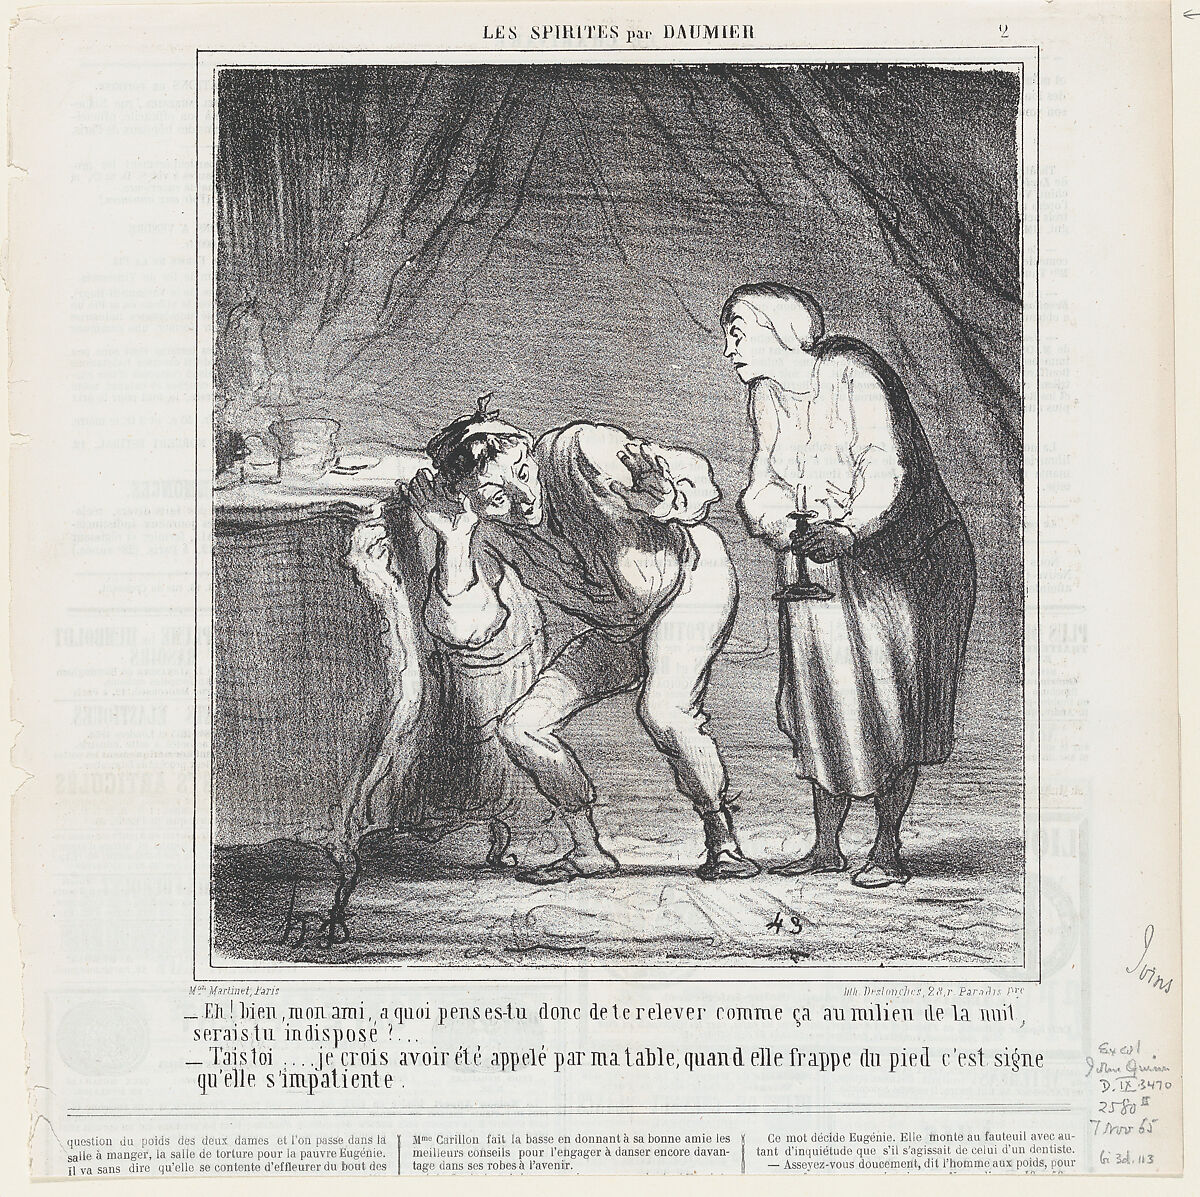 So you want to meddle with the press!, Honoré Daumier